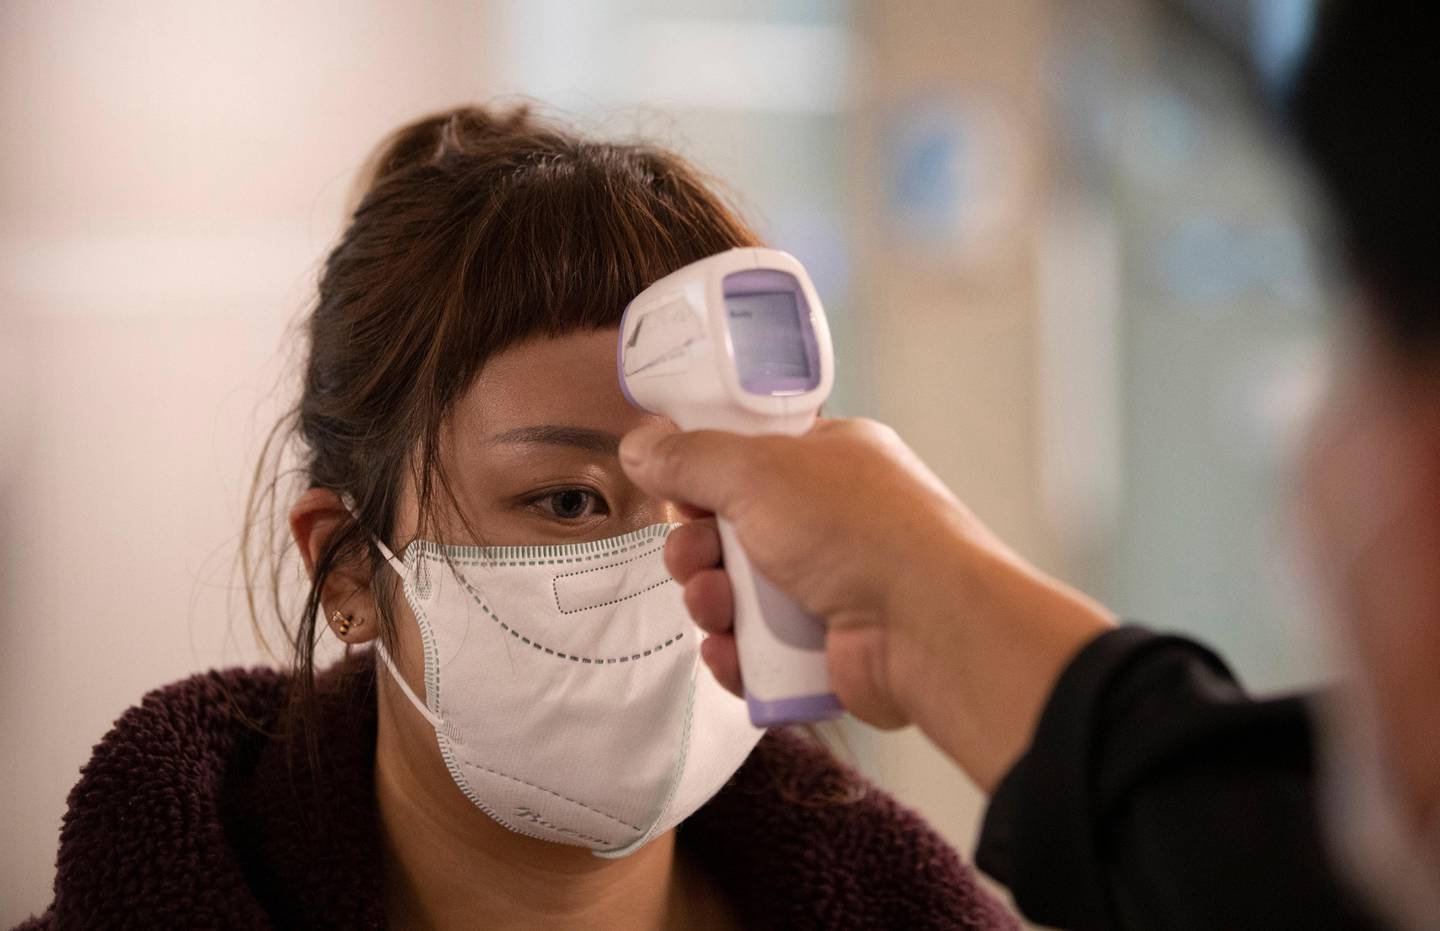 Health officials check tourists' temperatures on arrival in hopes of containing the spread of the COVID-19 virus at the Suvarnabhumi Airport in Bangkok, Thailand, Wednesday, March 4, 2020. (AP Photo/Sakchai Lalit)